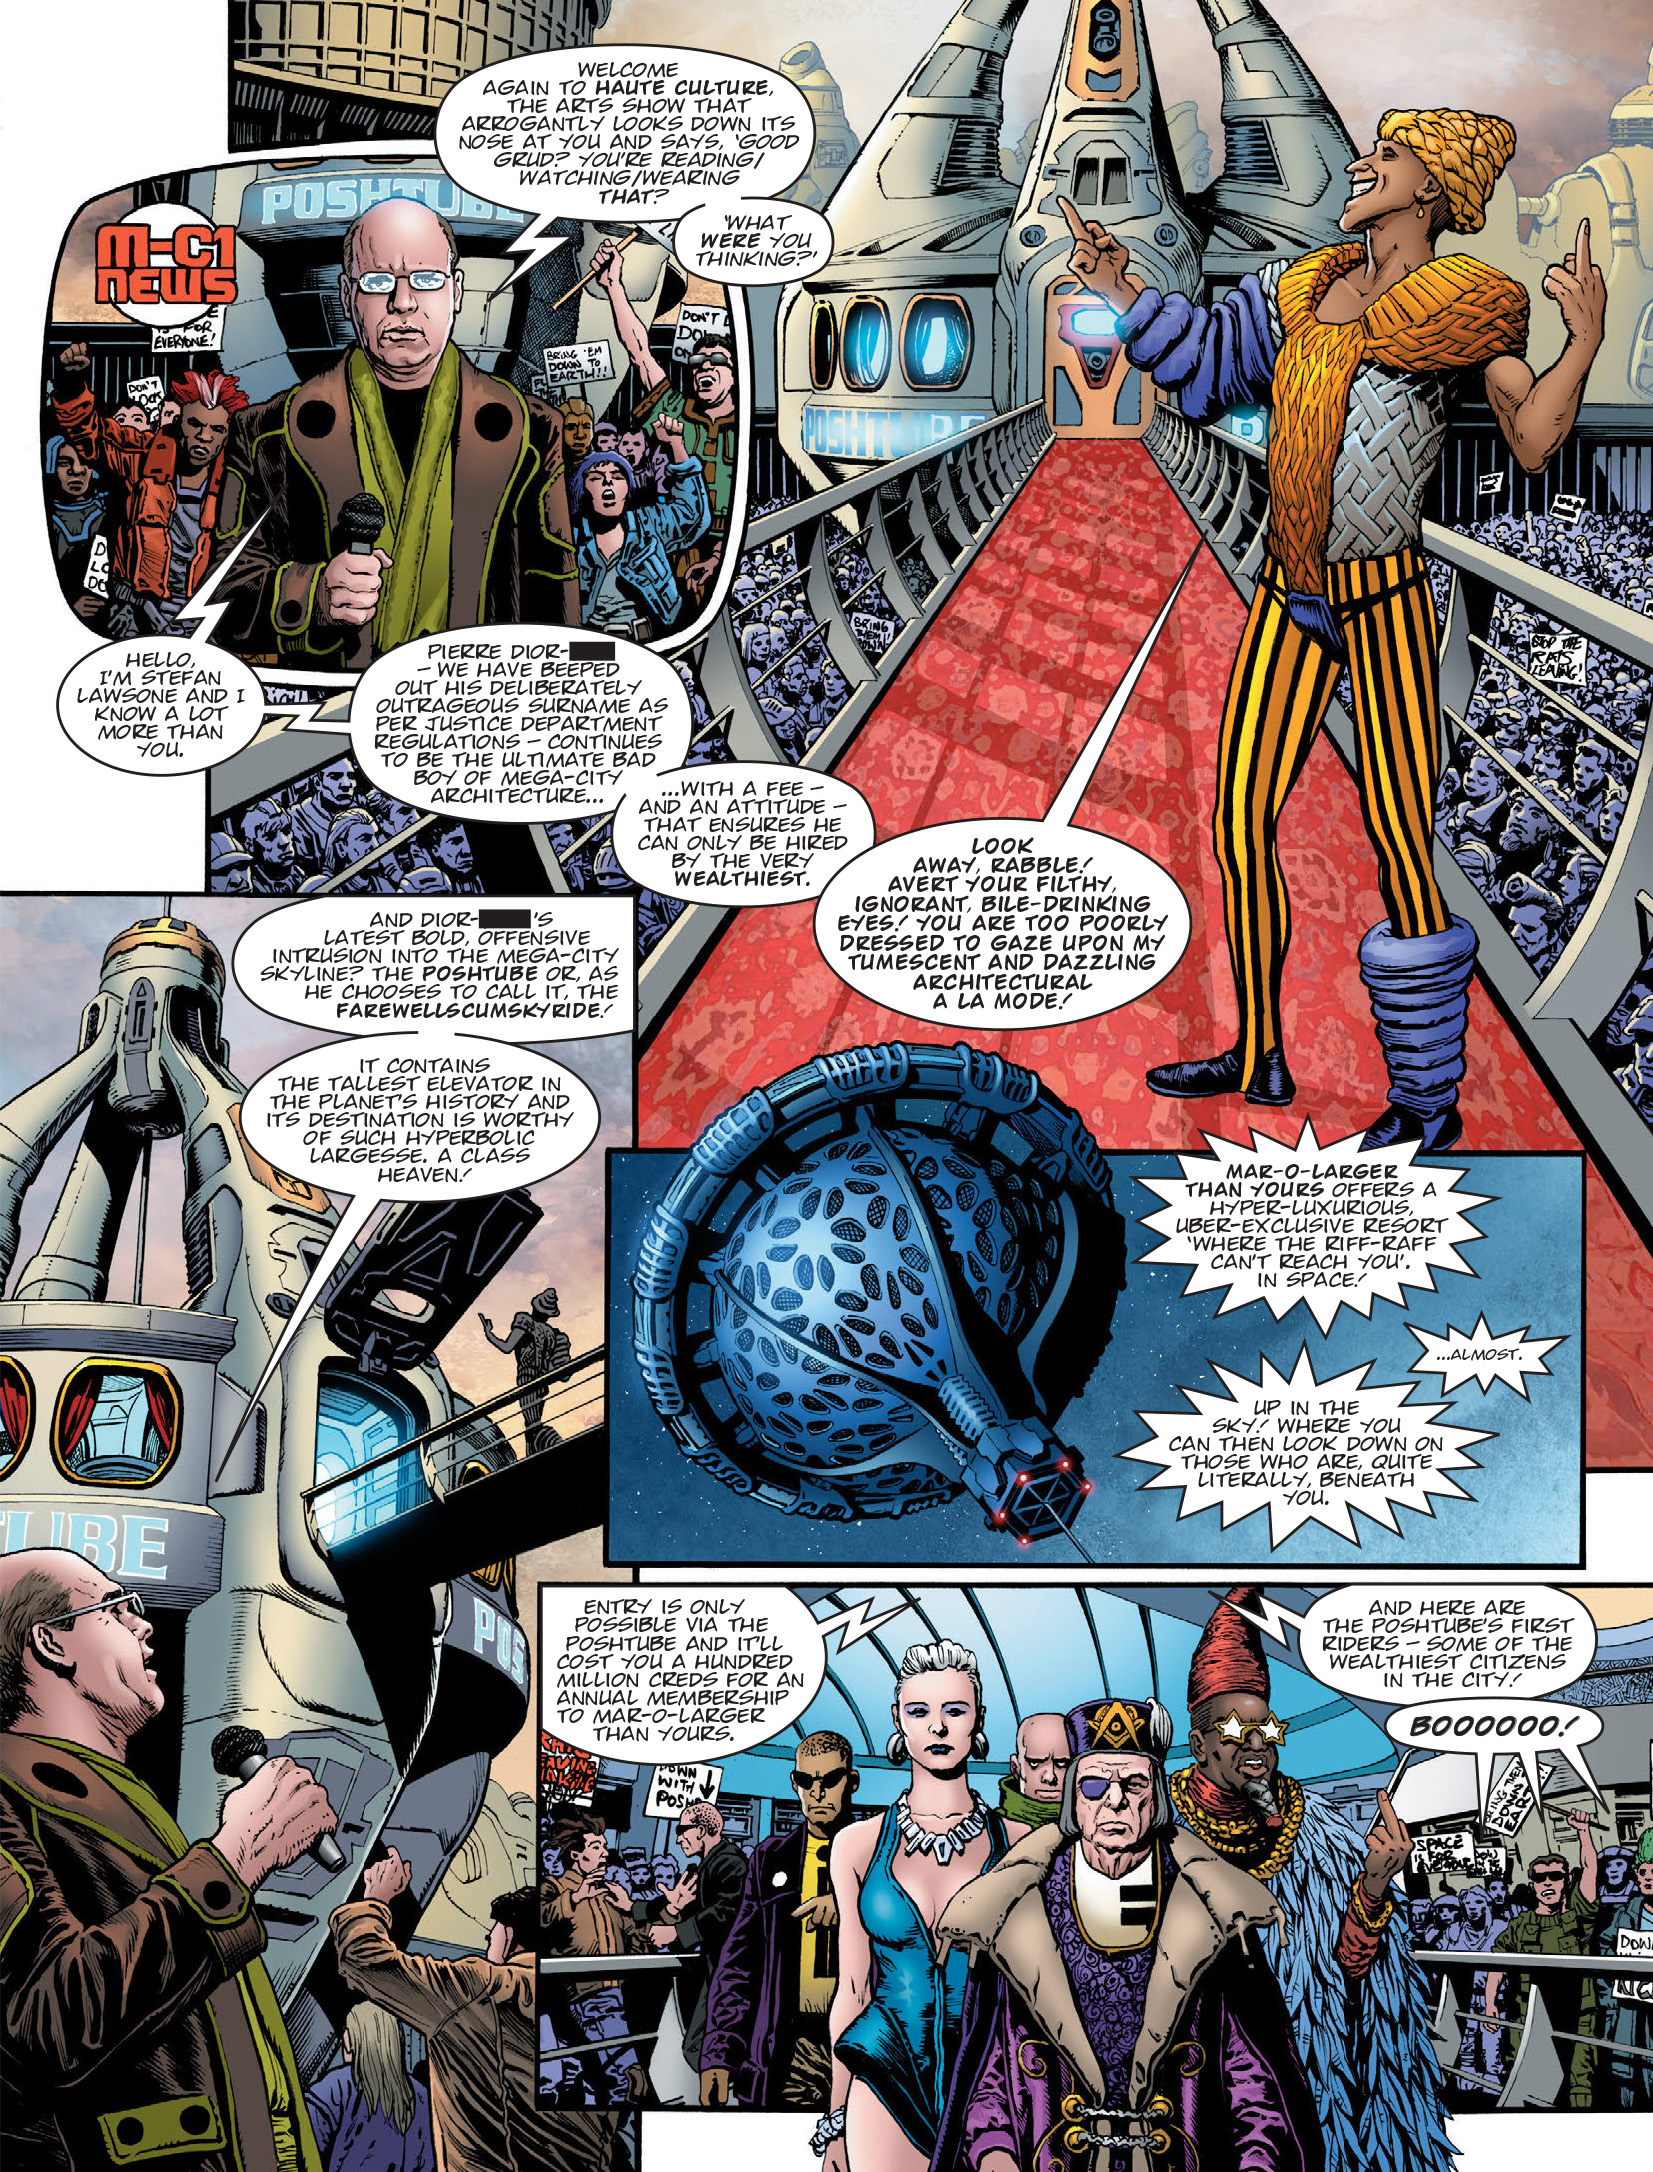 2000 AD: Chapter 2088 - Page 4